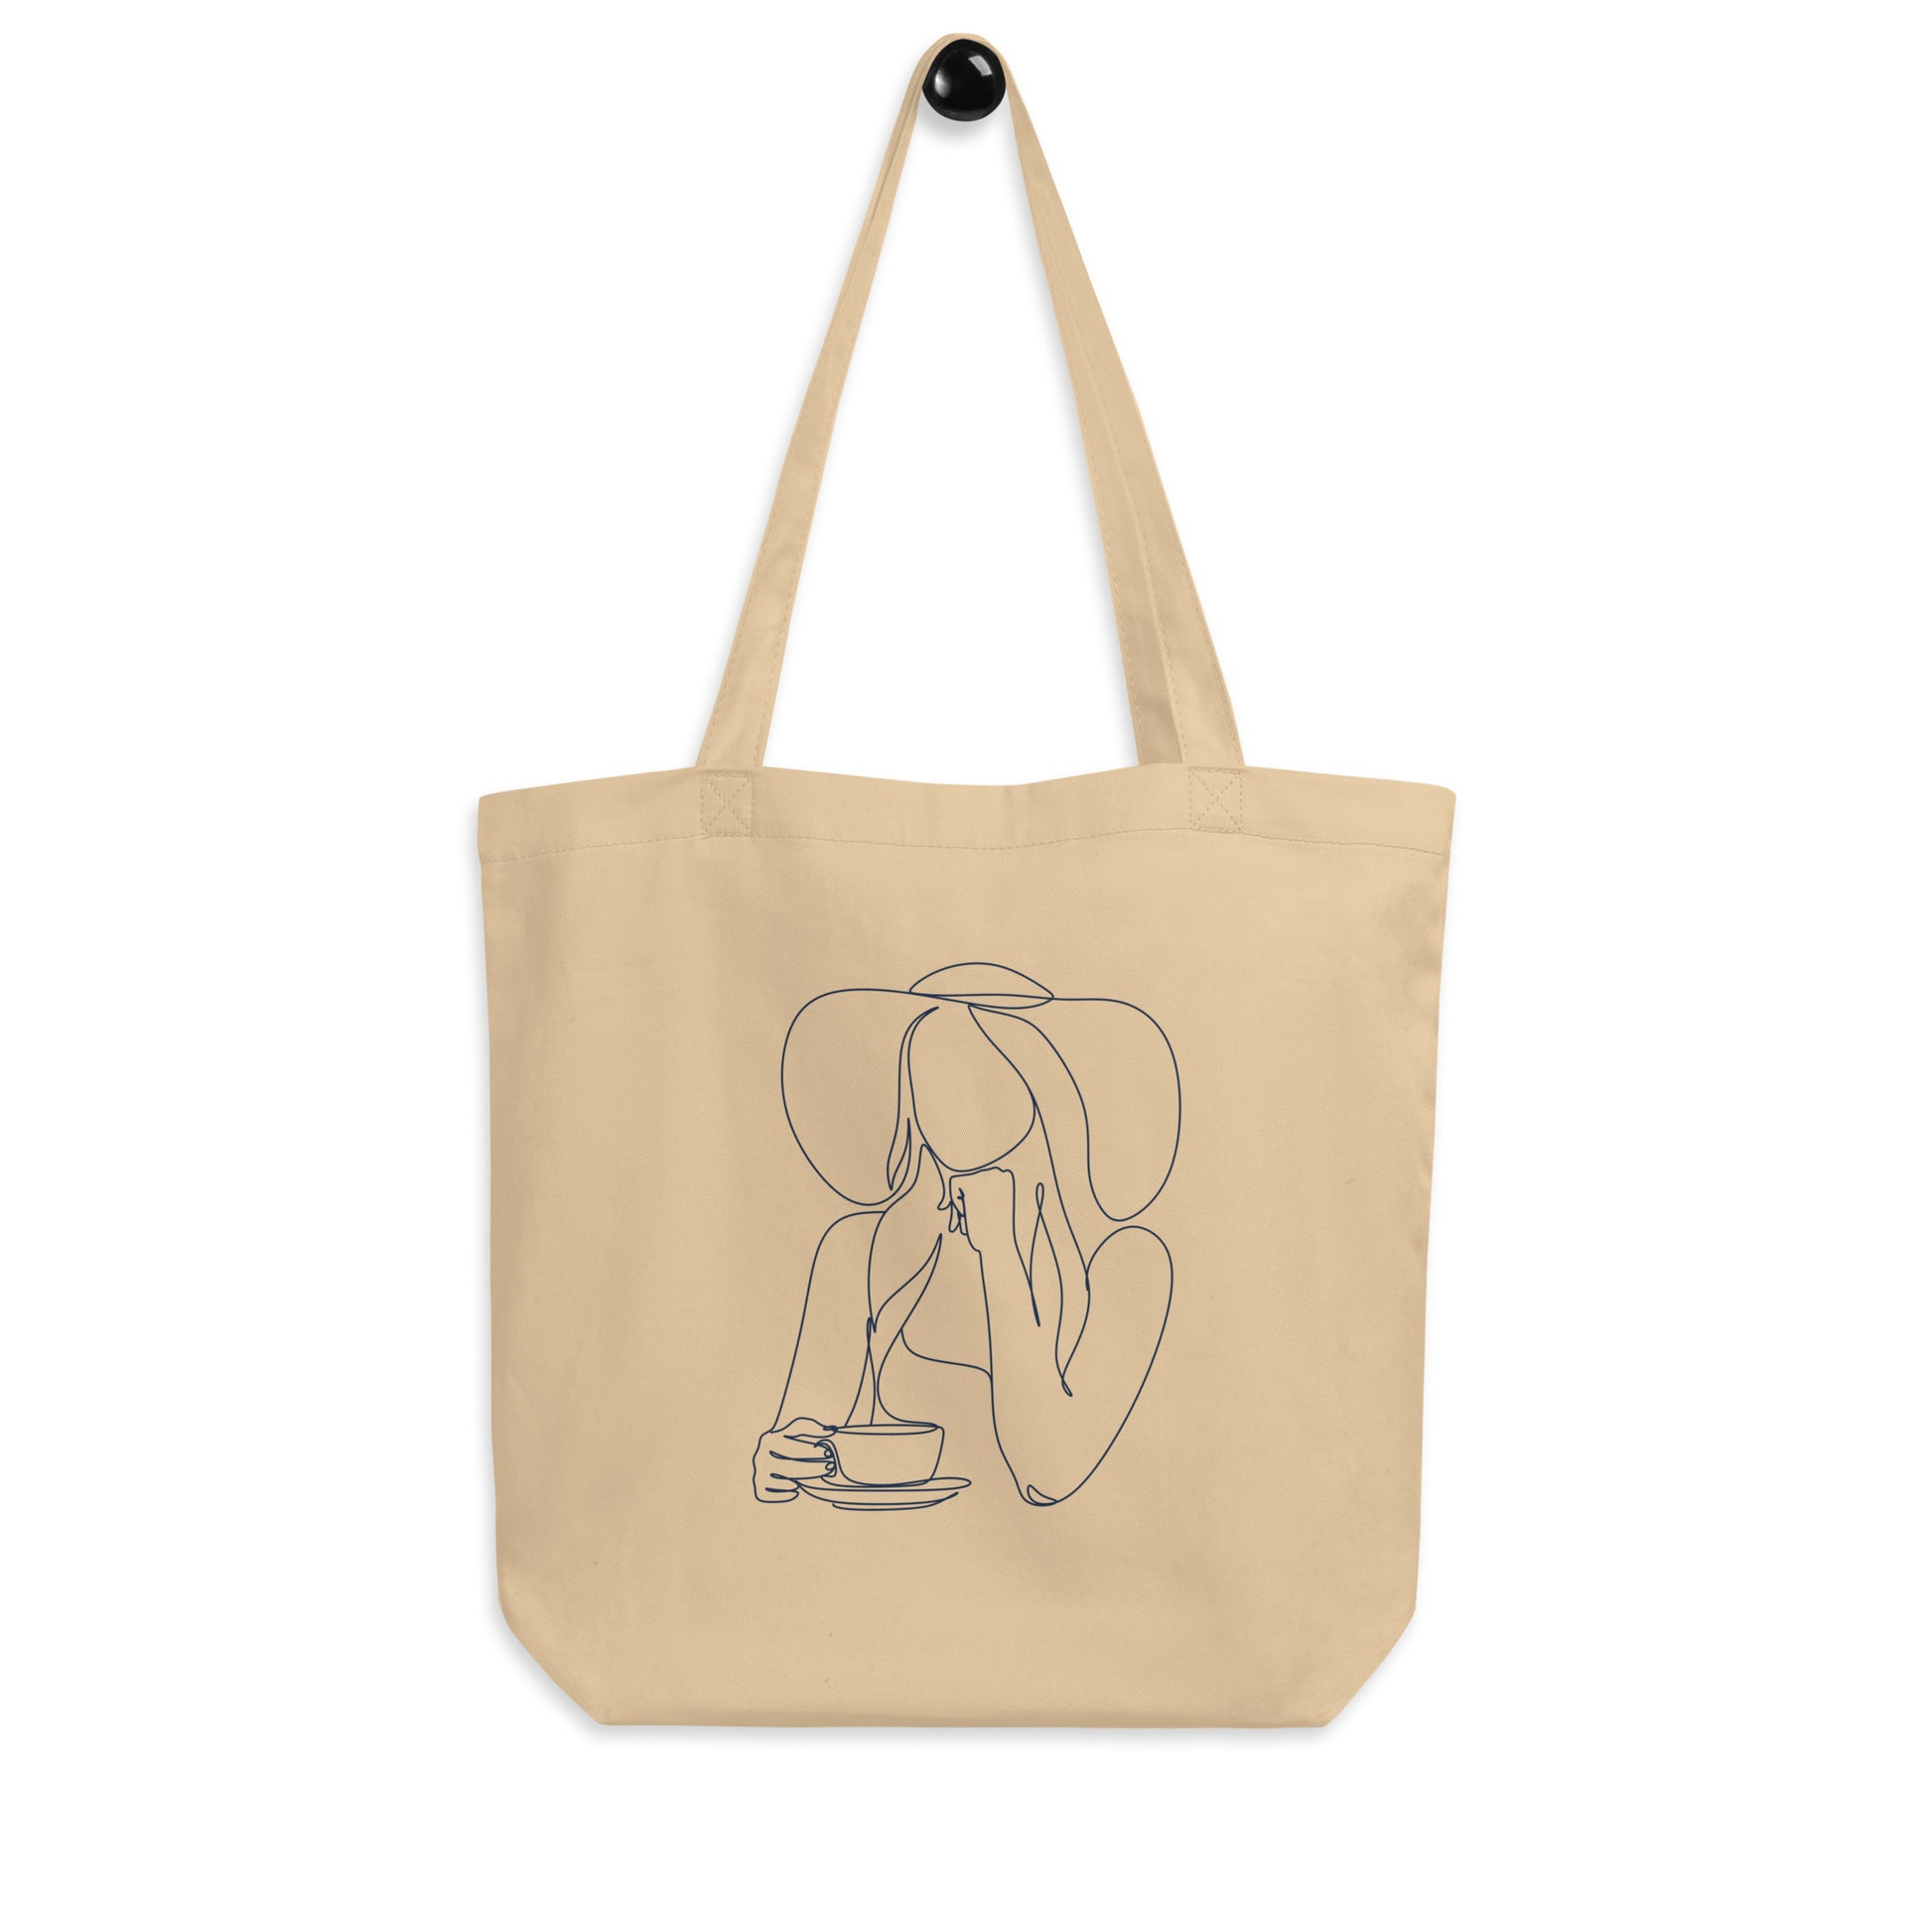 100% cotton tote bag feature artwork of woman wearing a hat drink hot coffee